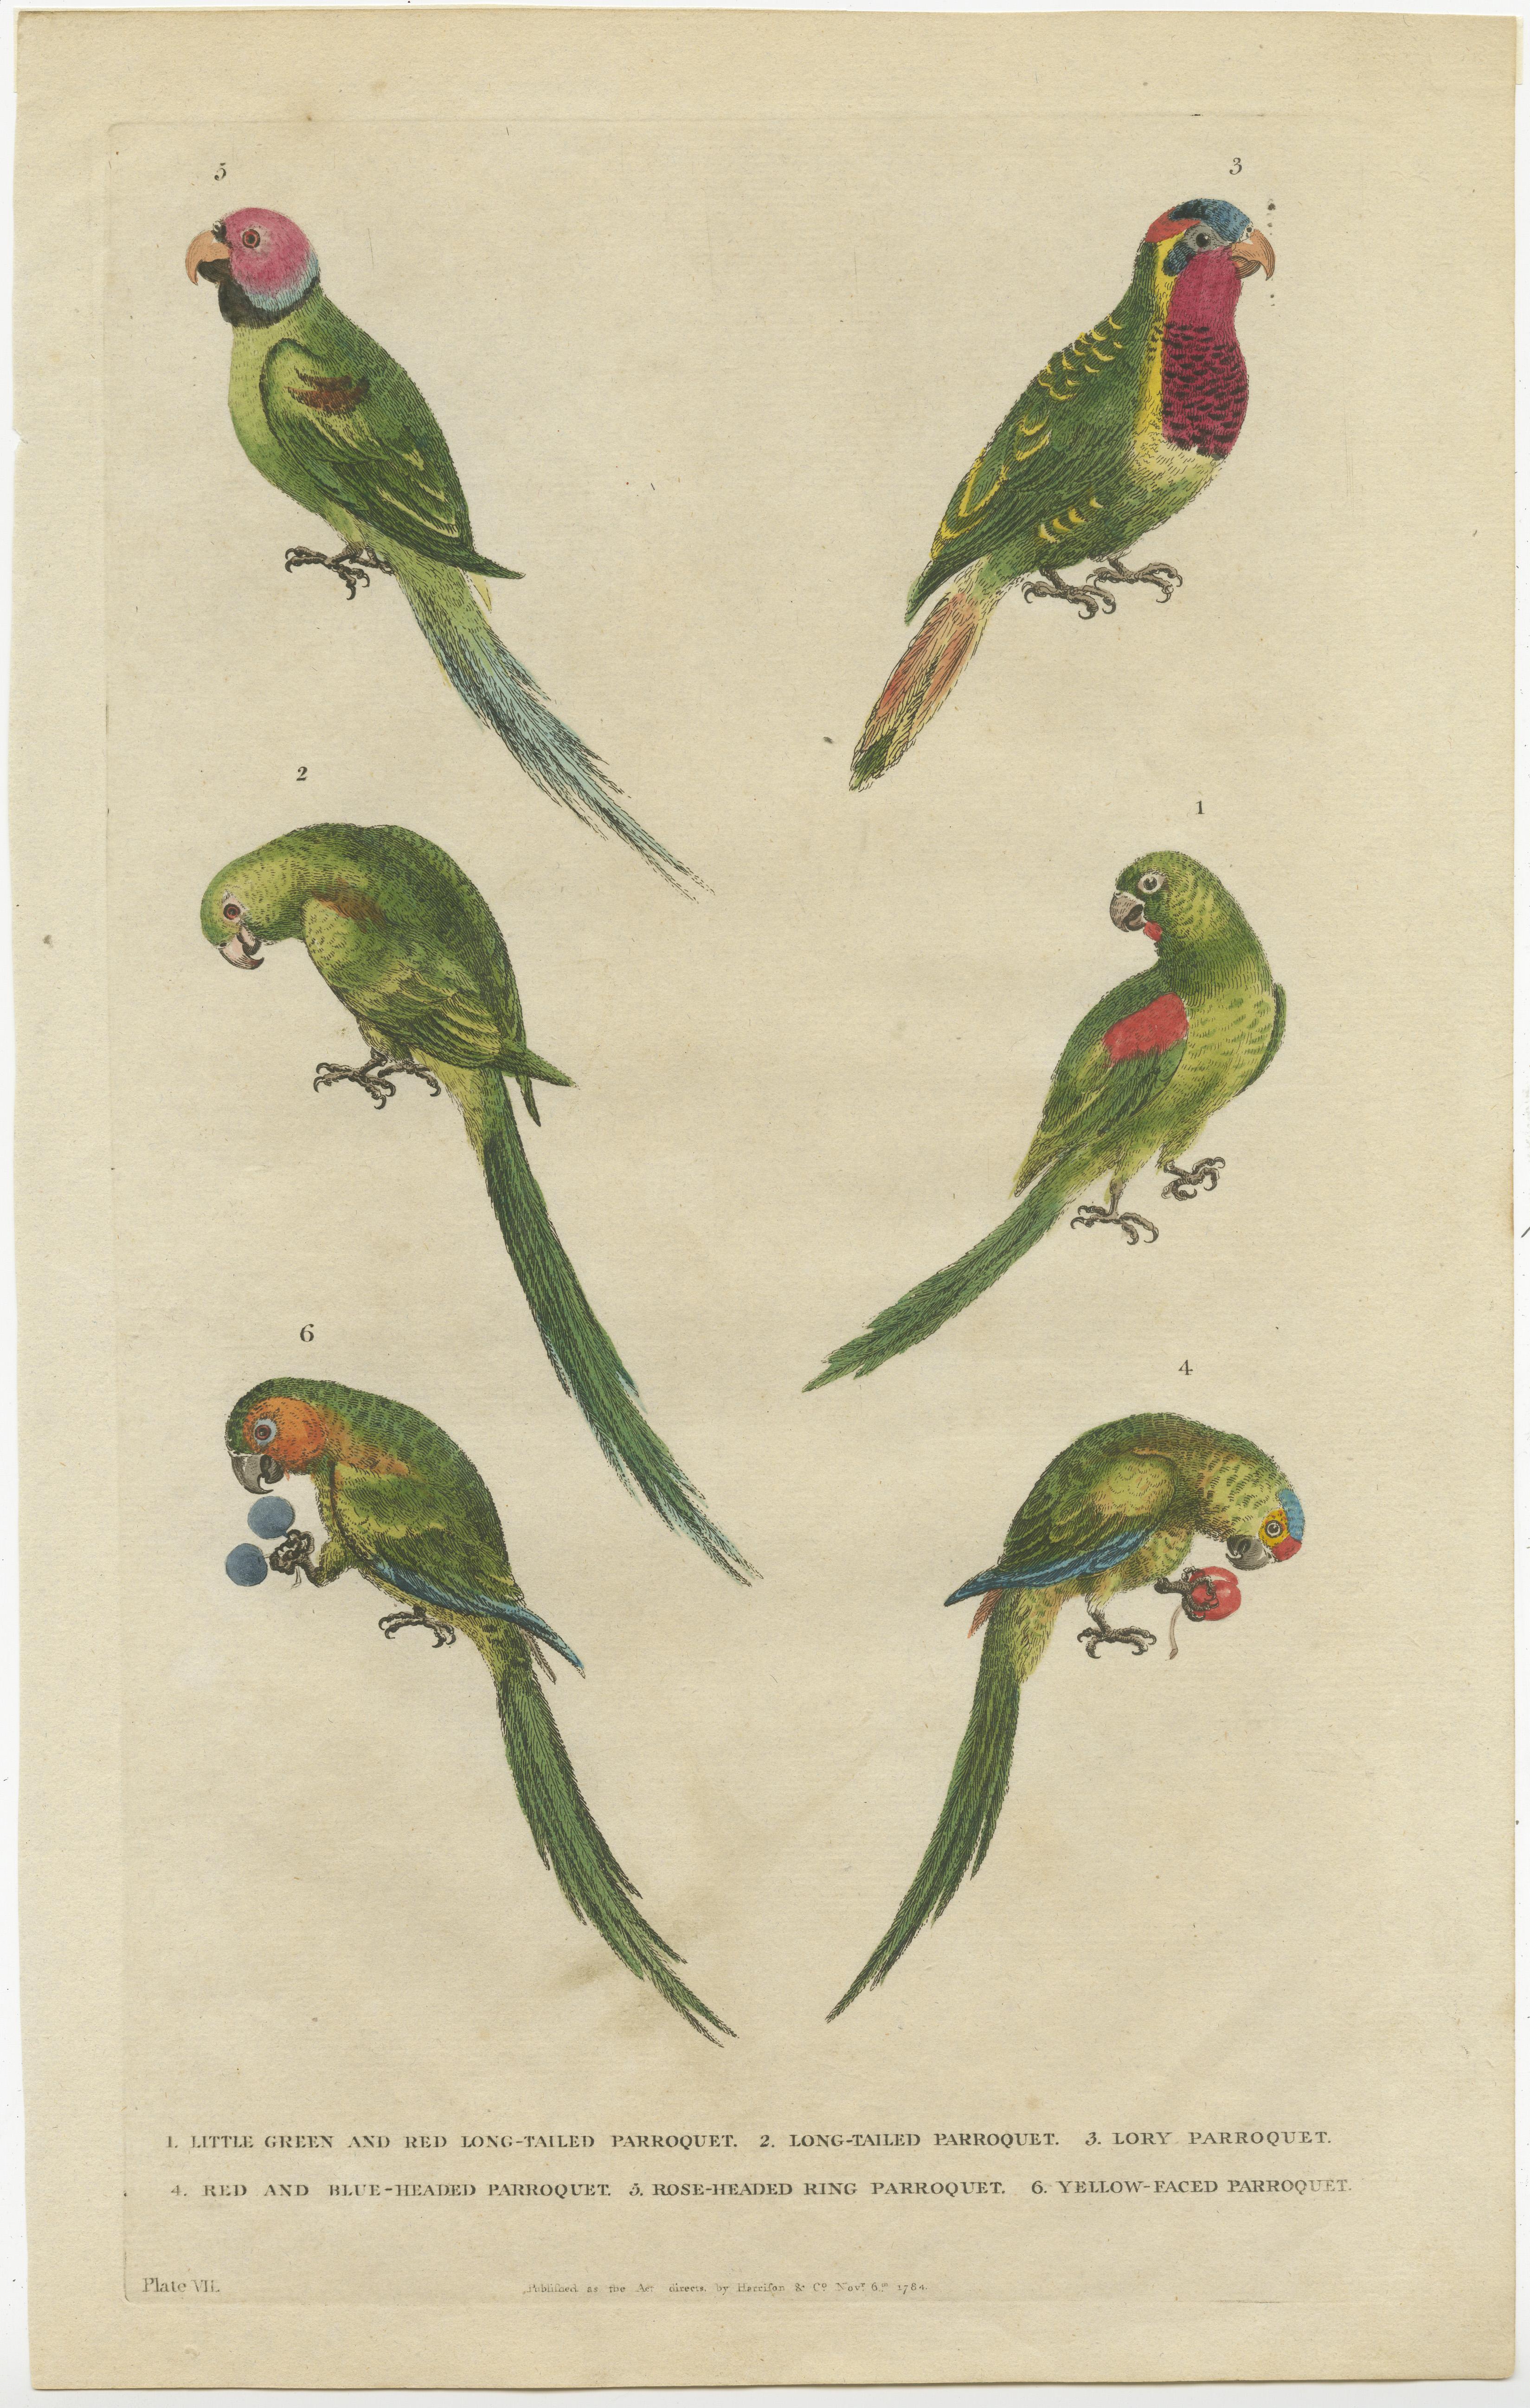 Set of two antique bird prints titled 'Little Green and Red Long-Tailed Parroquet - Long-Tailed Parroquet'. These prints shown various parakeet species. Originates from 'A New Dictionary of Natural History' by William Frederick Marytn, published by